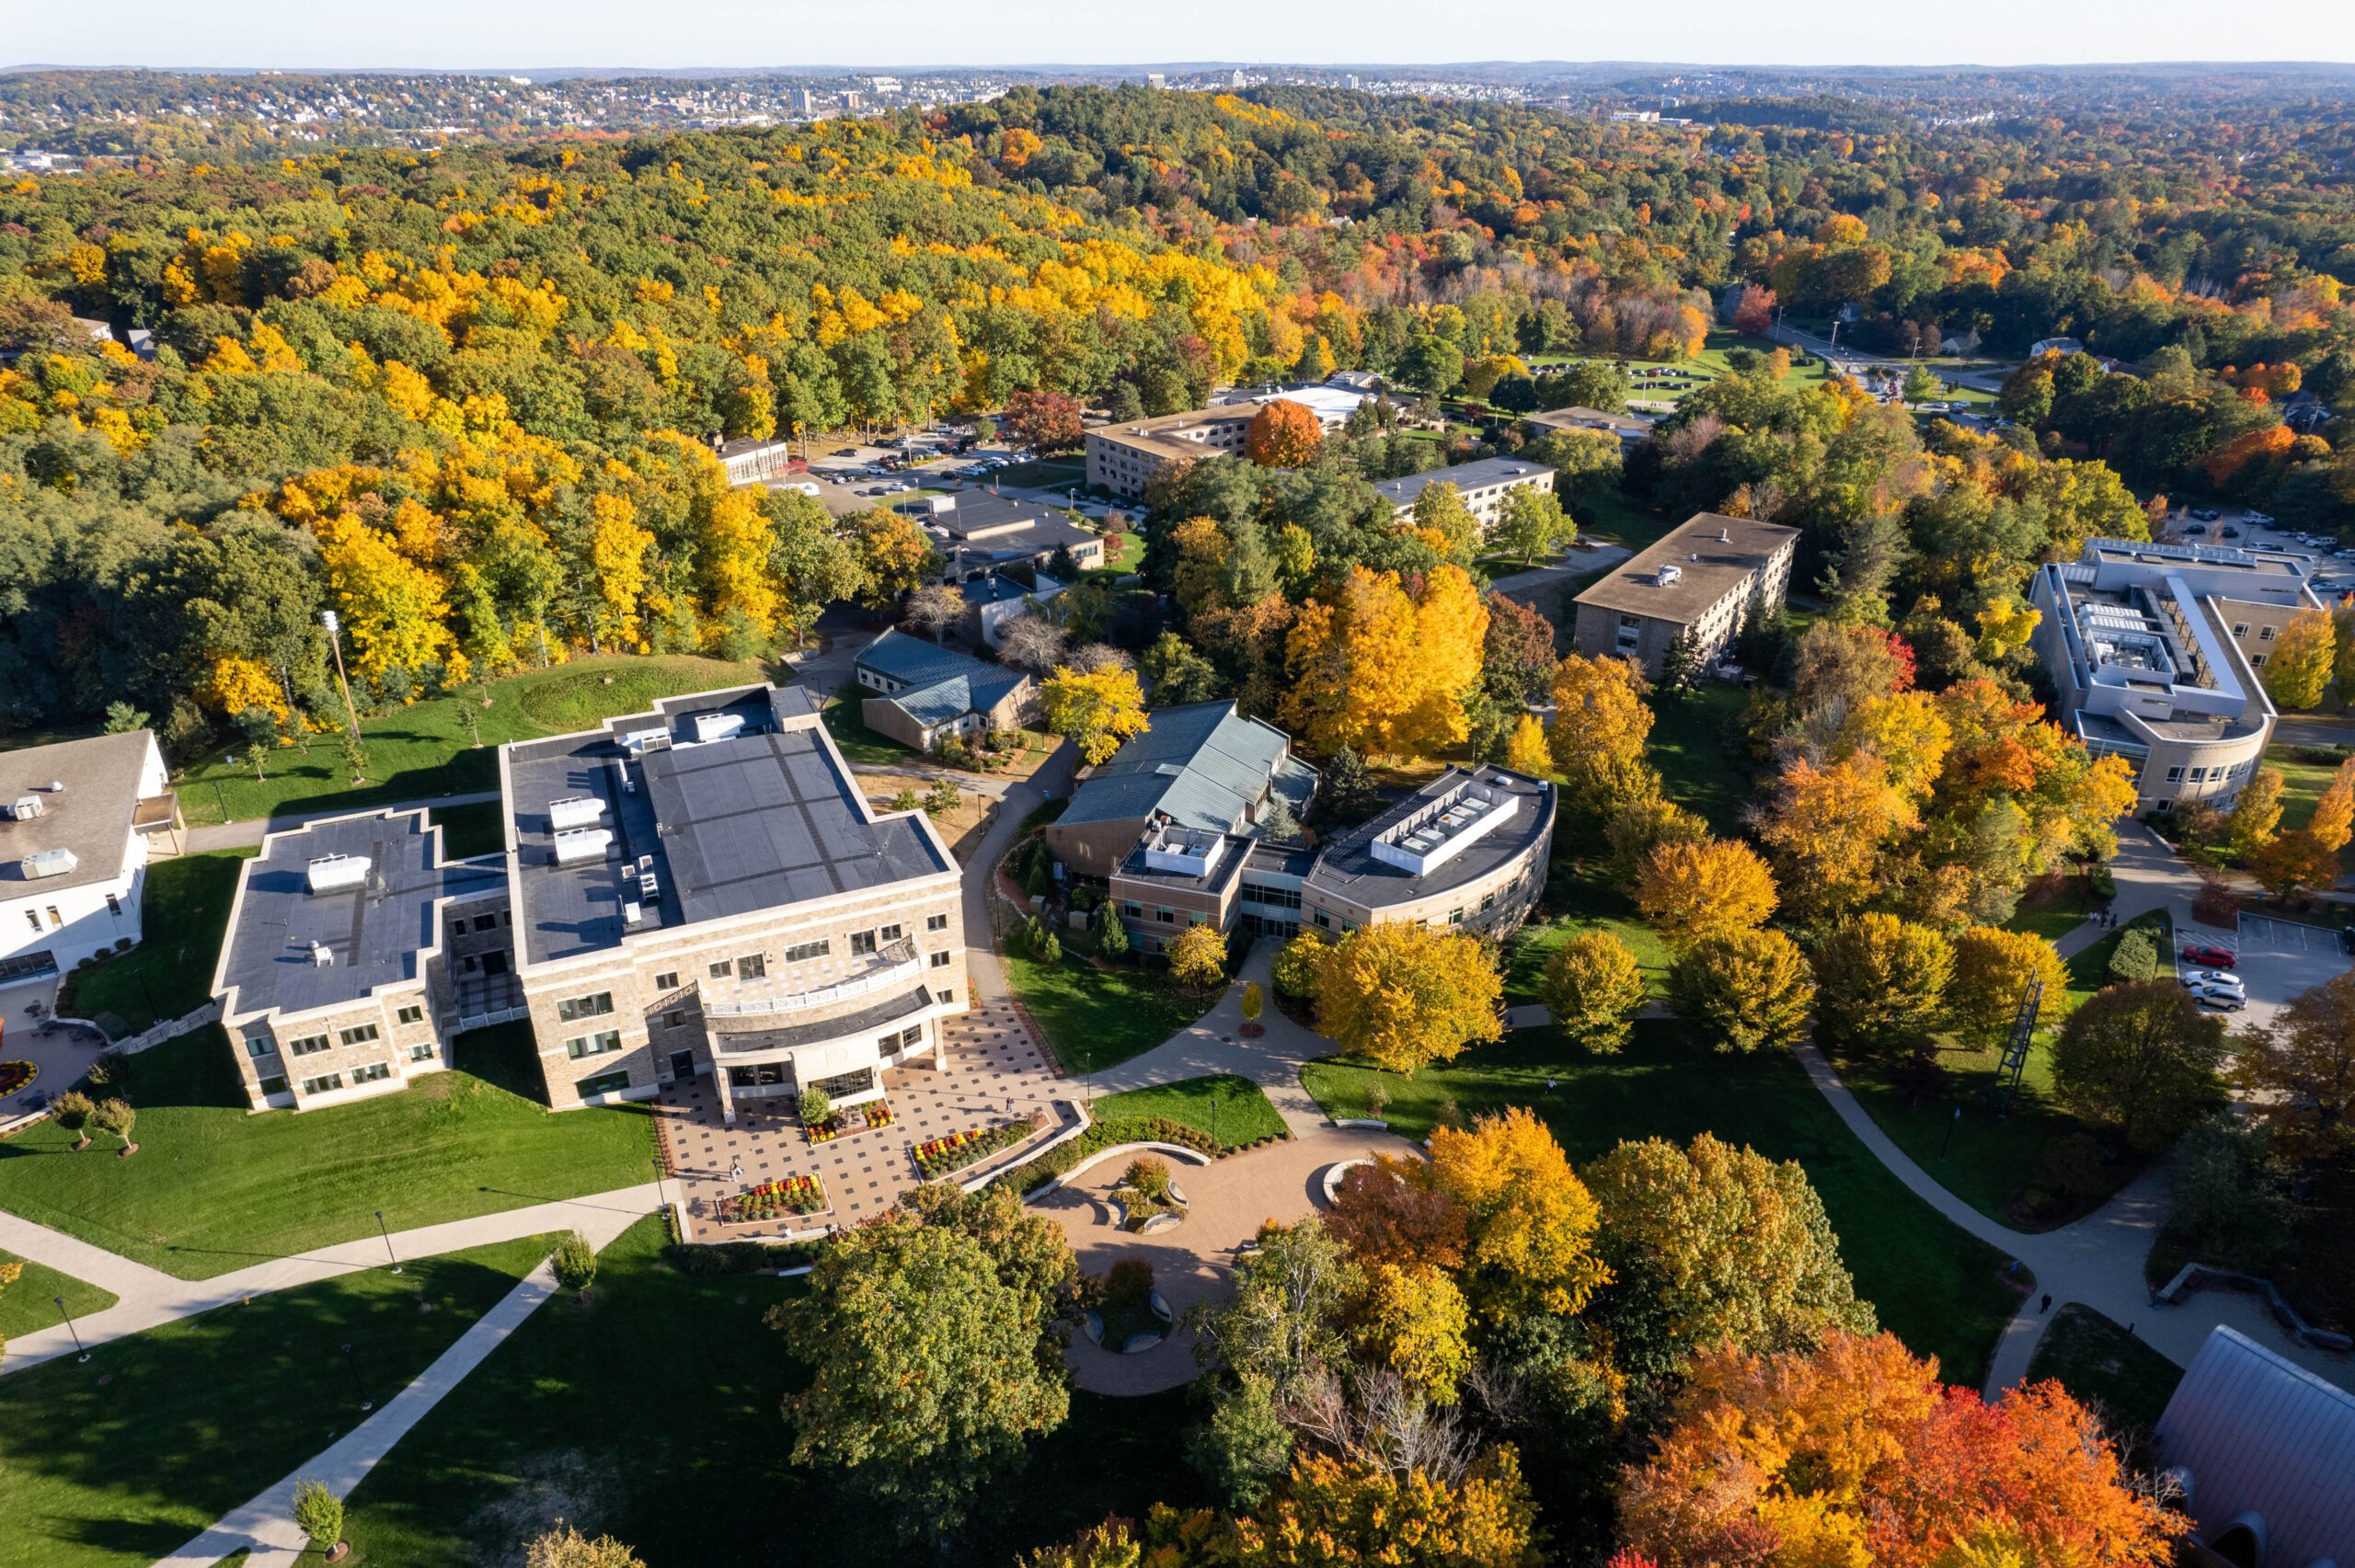 An aerial shot of the center of Assumption University's beautiful campus in the fall